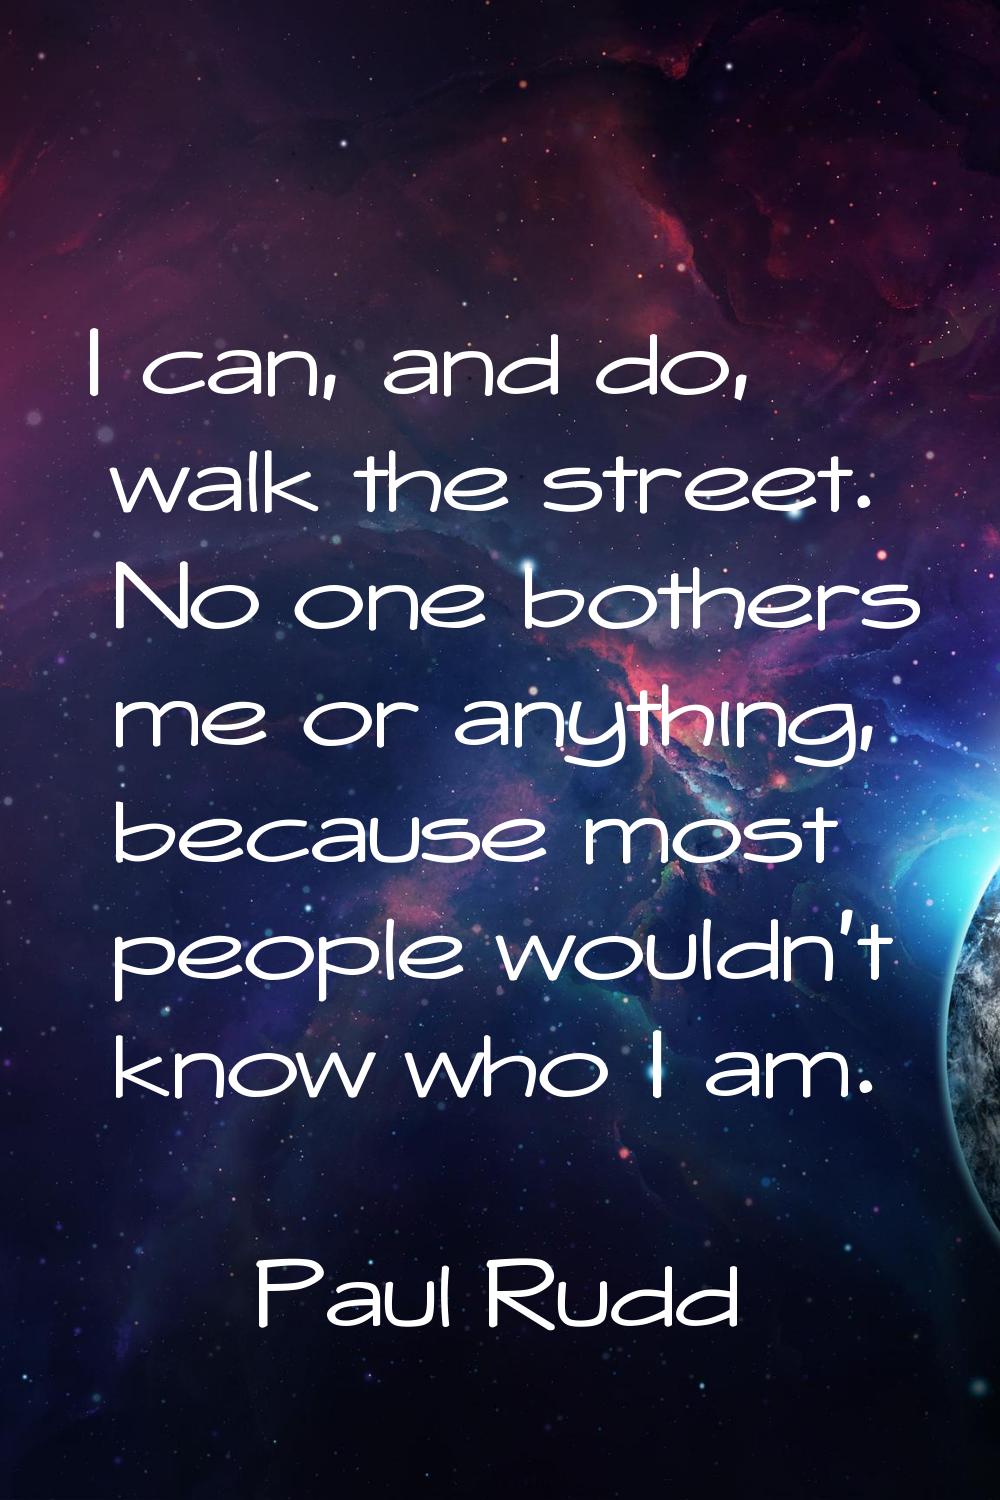 I can, and do, walk the street. No one bothers me or anything, because most people wouldn't know wh